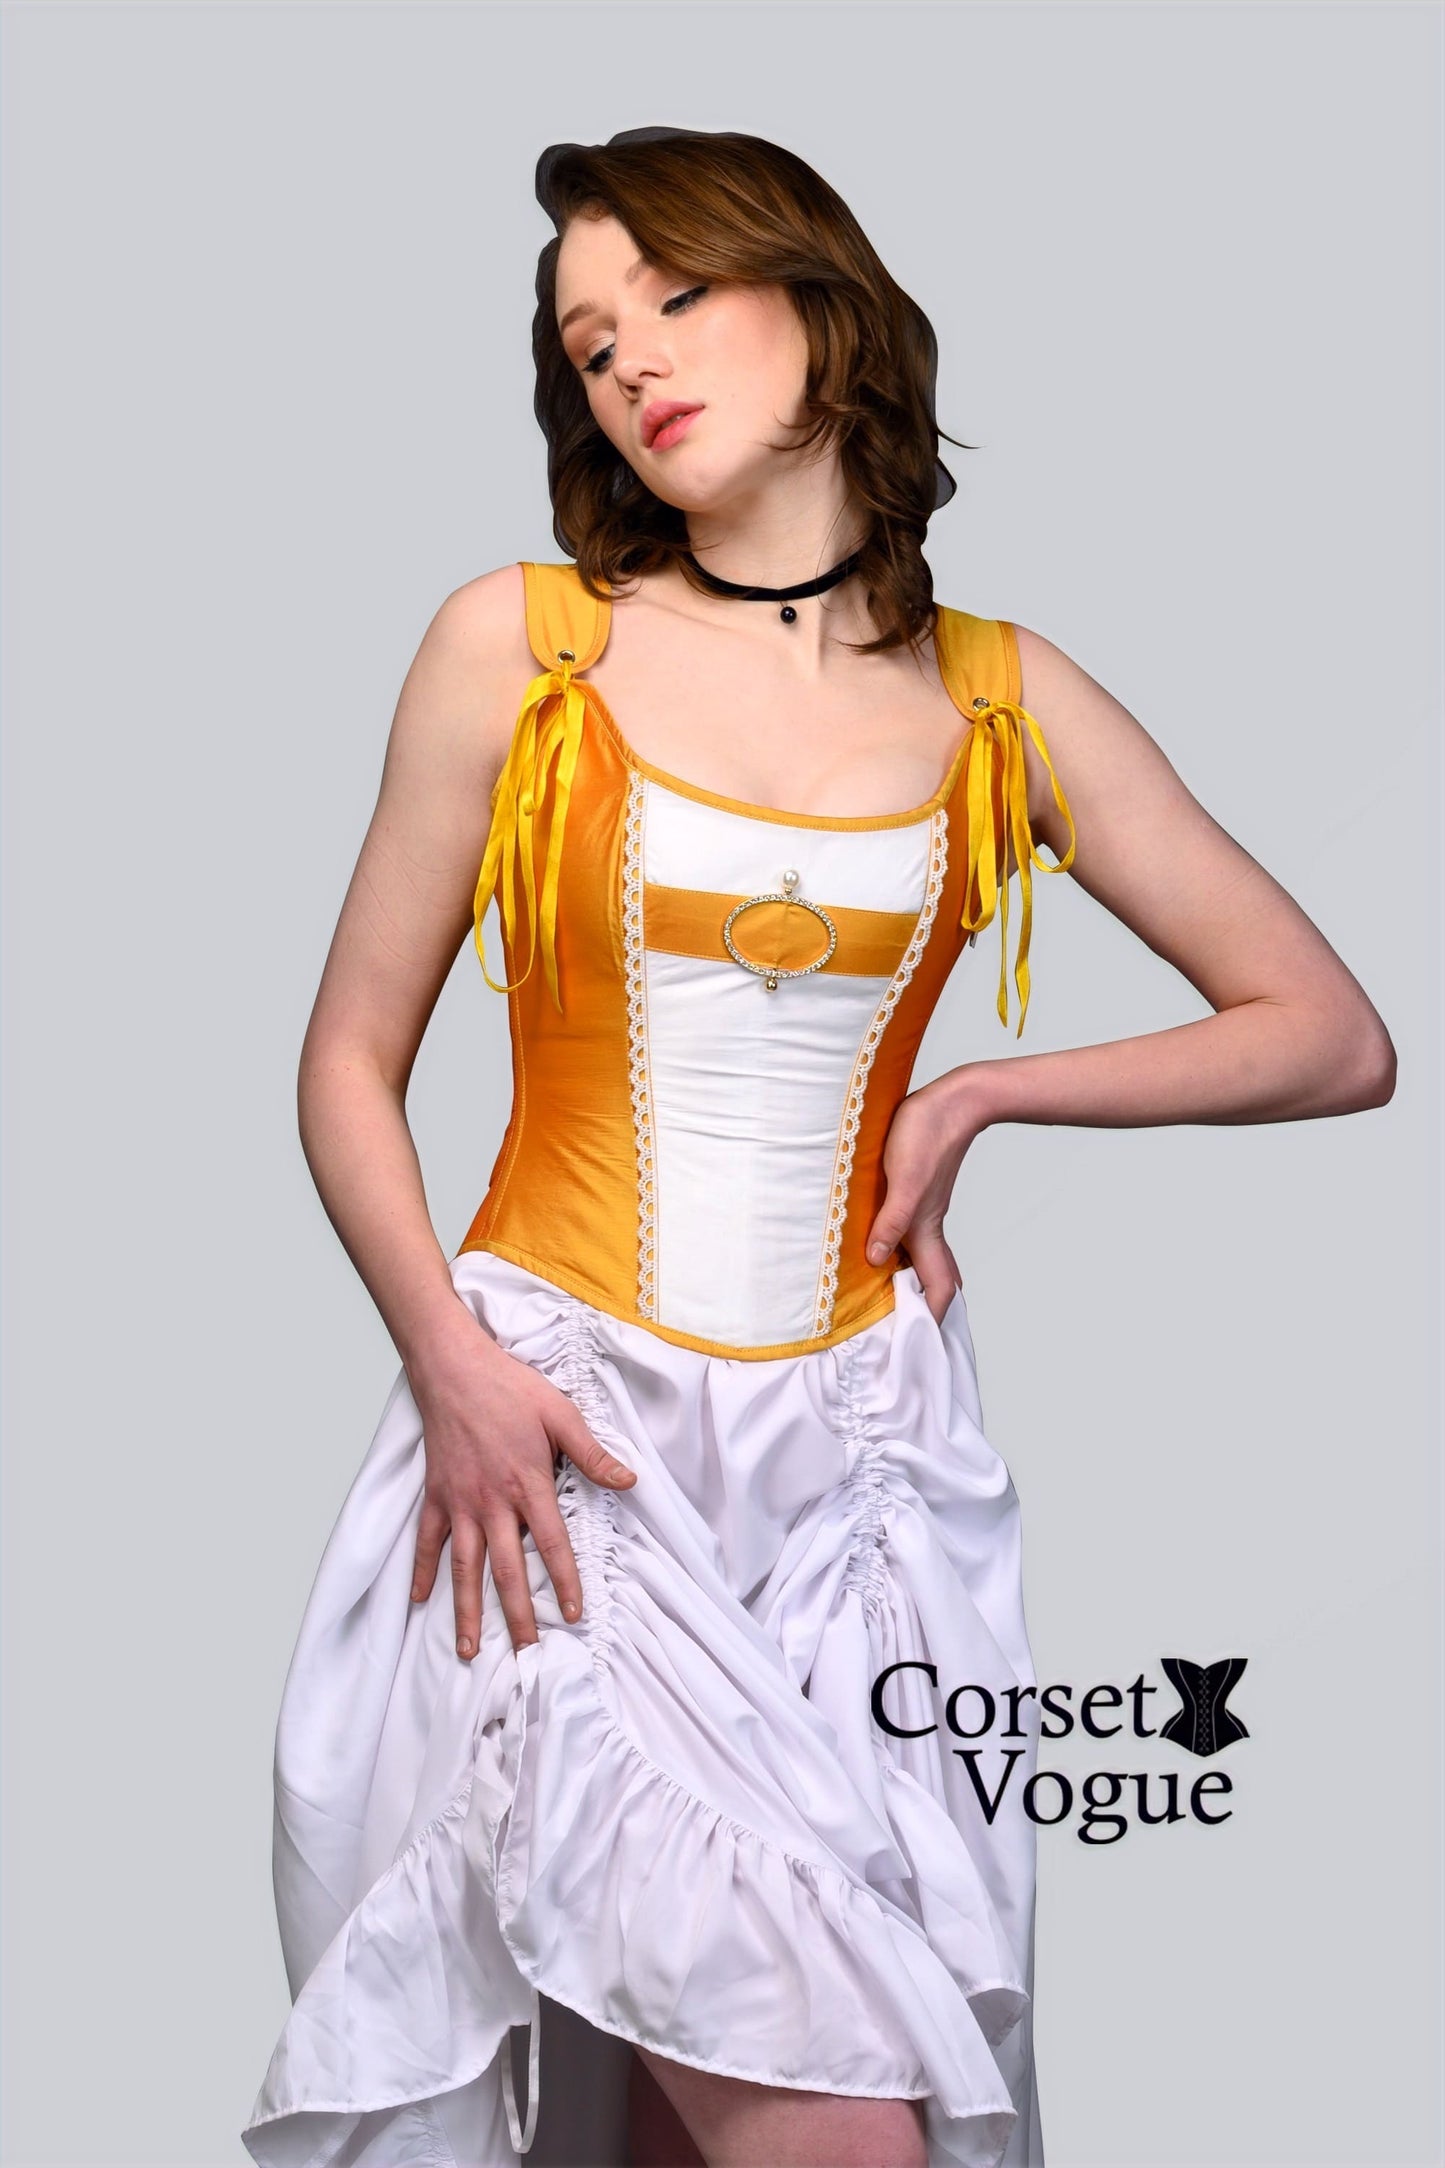 Historical Corset side